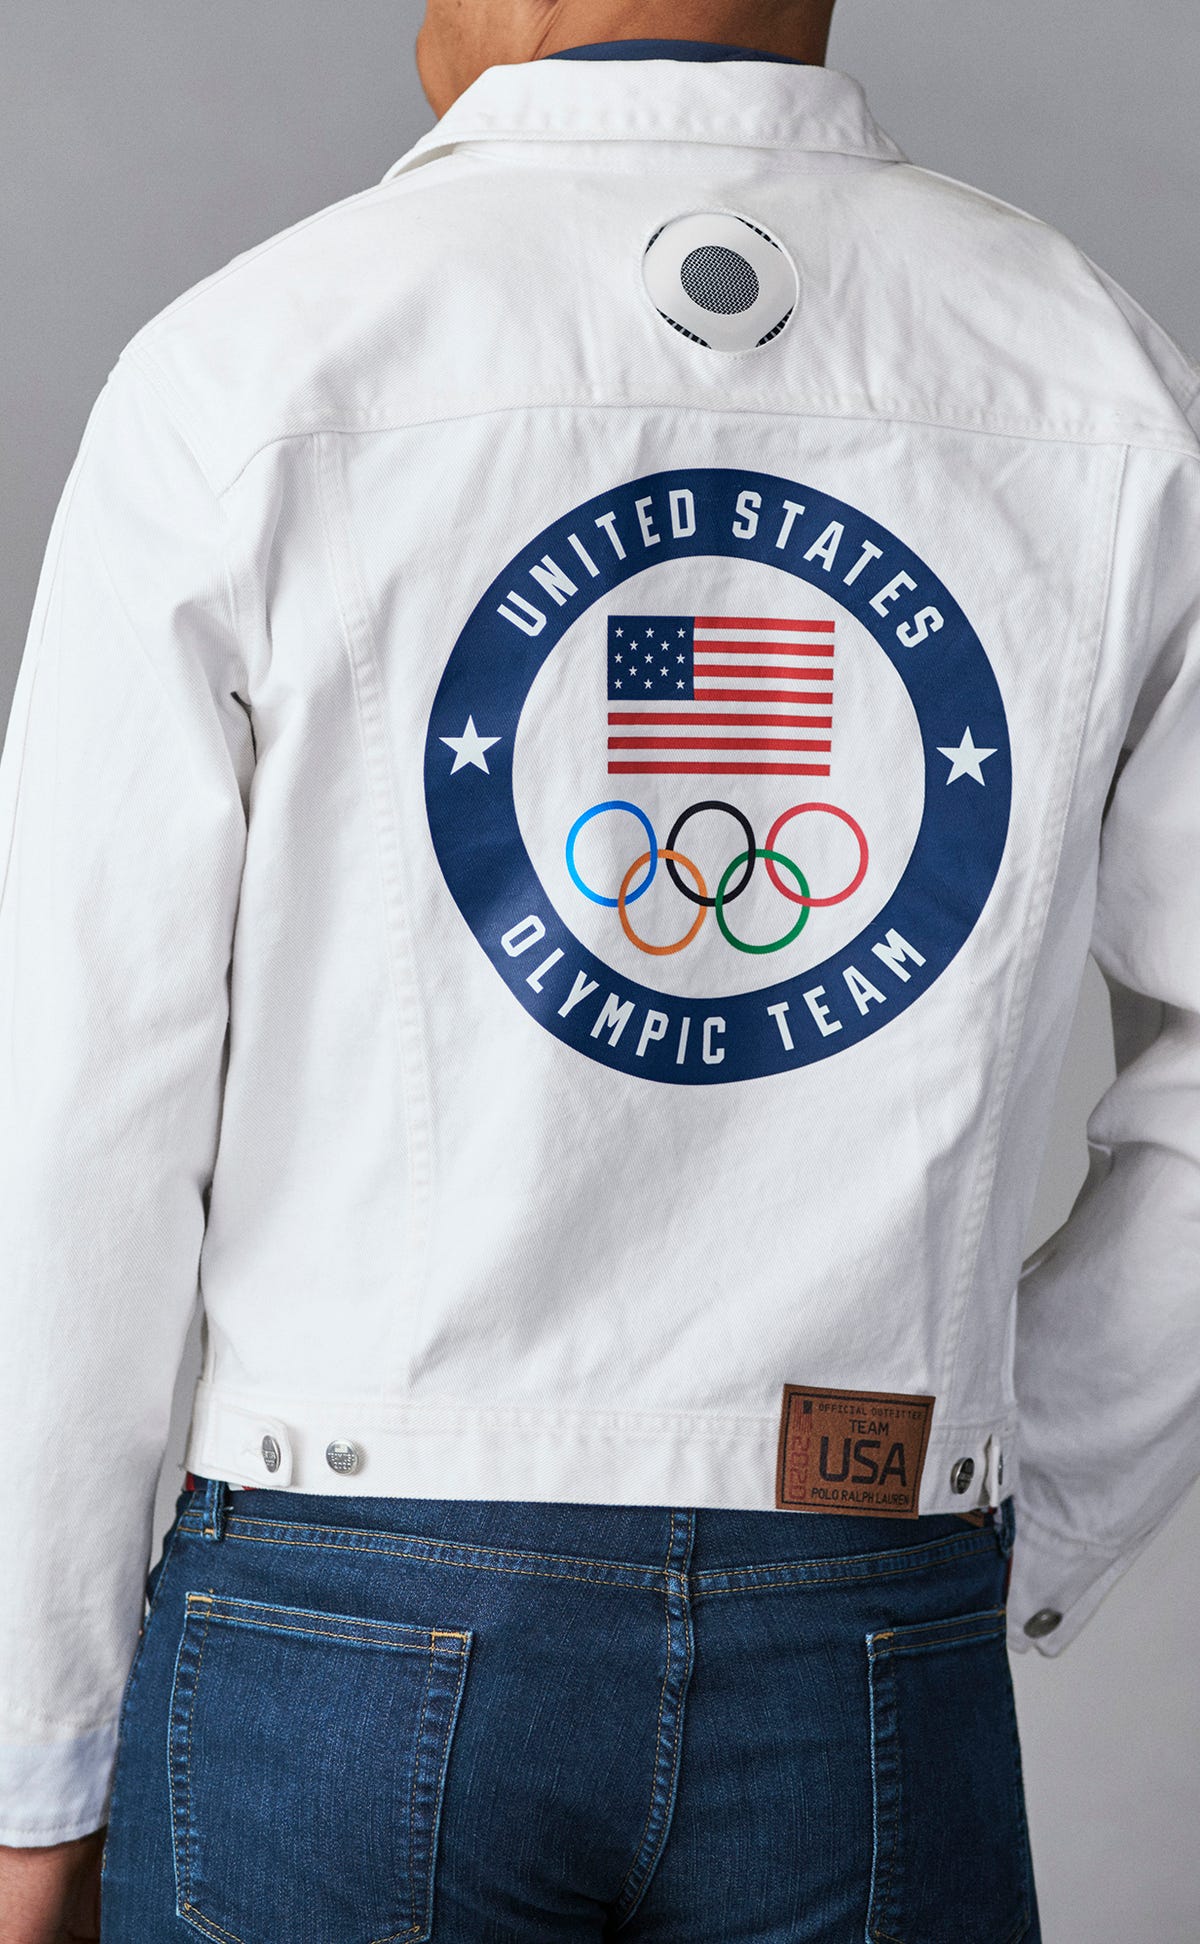 Team USA Olympics opening ceremony uniform by Ralph Lauren unveiled